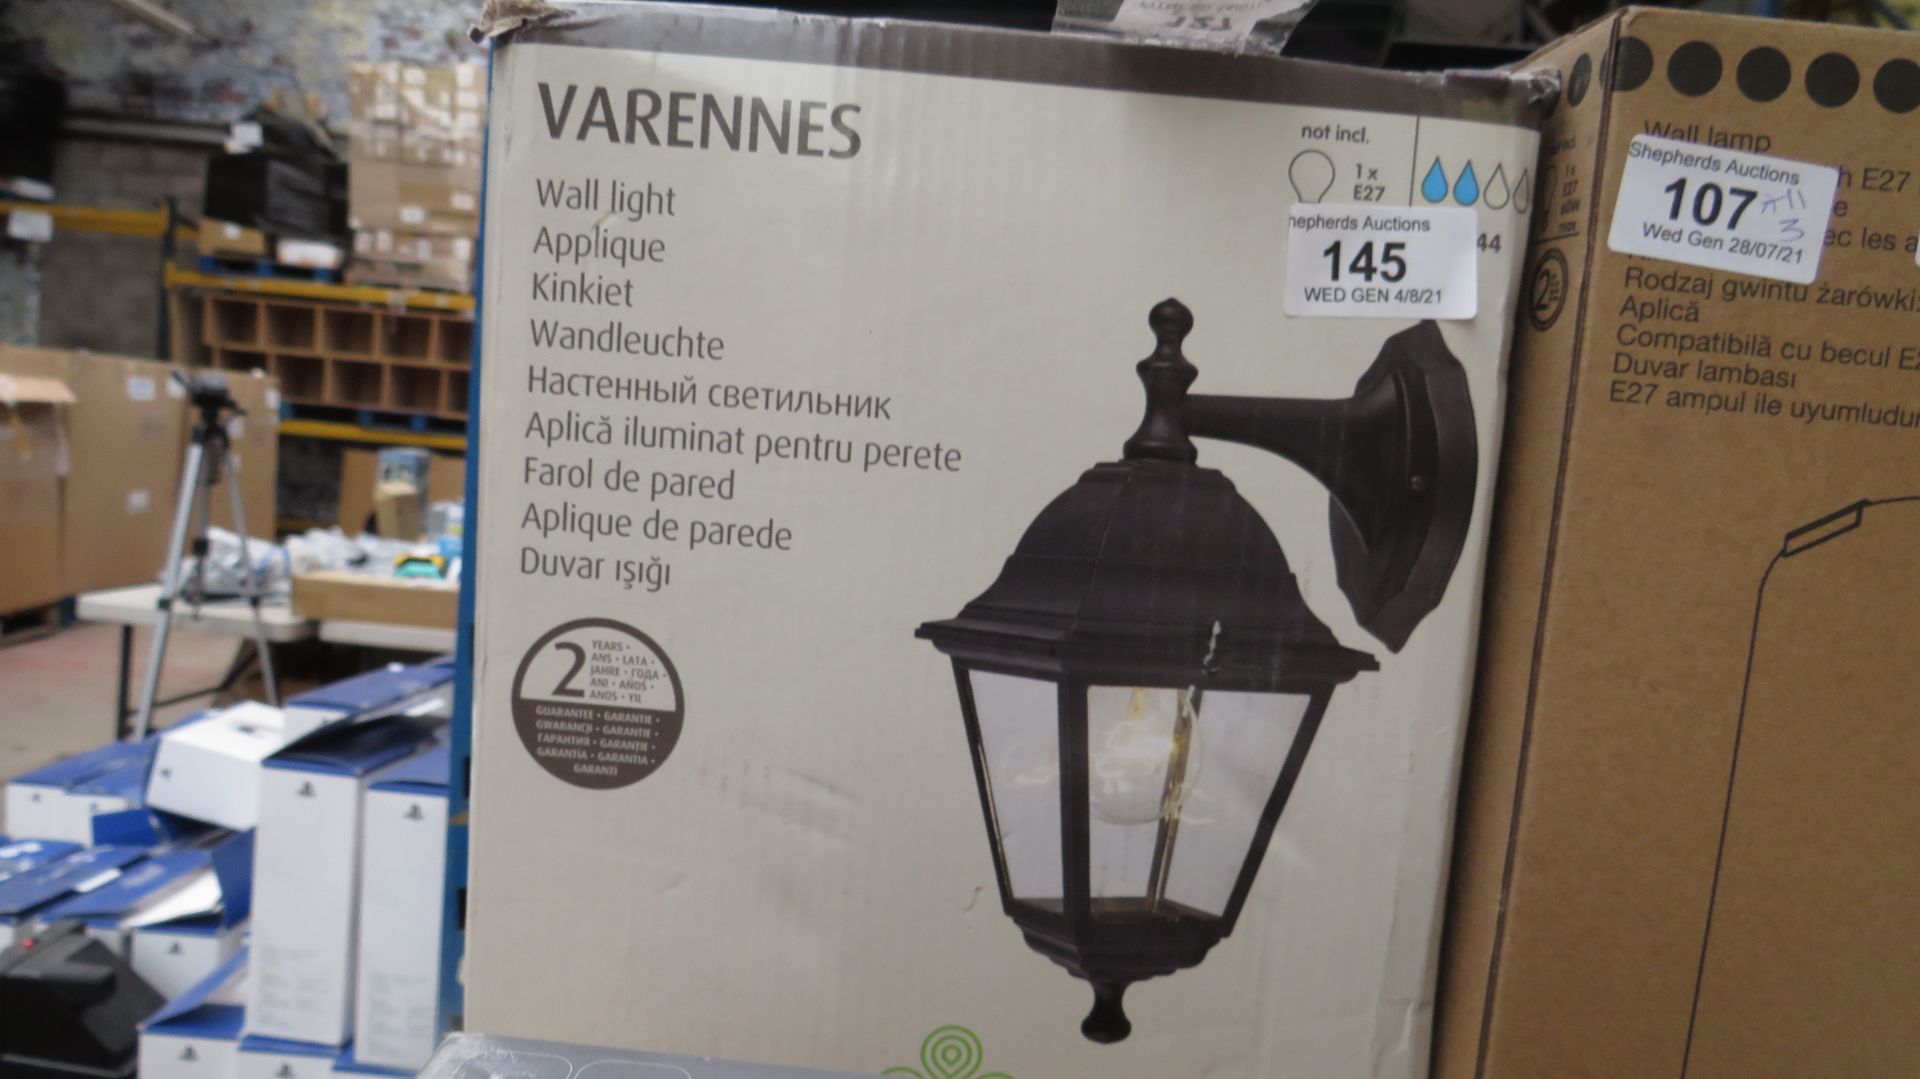 1X VARENNES WALL LIGHT, UNCHECKED AND BOXED, SEE PICTURE.